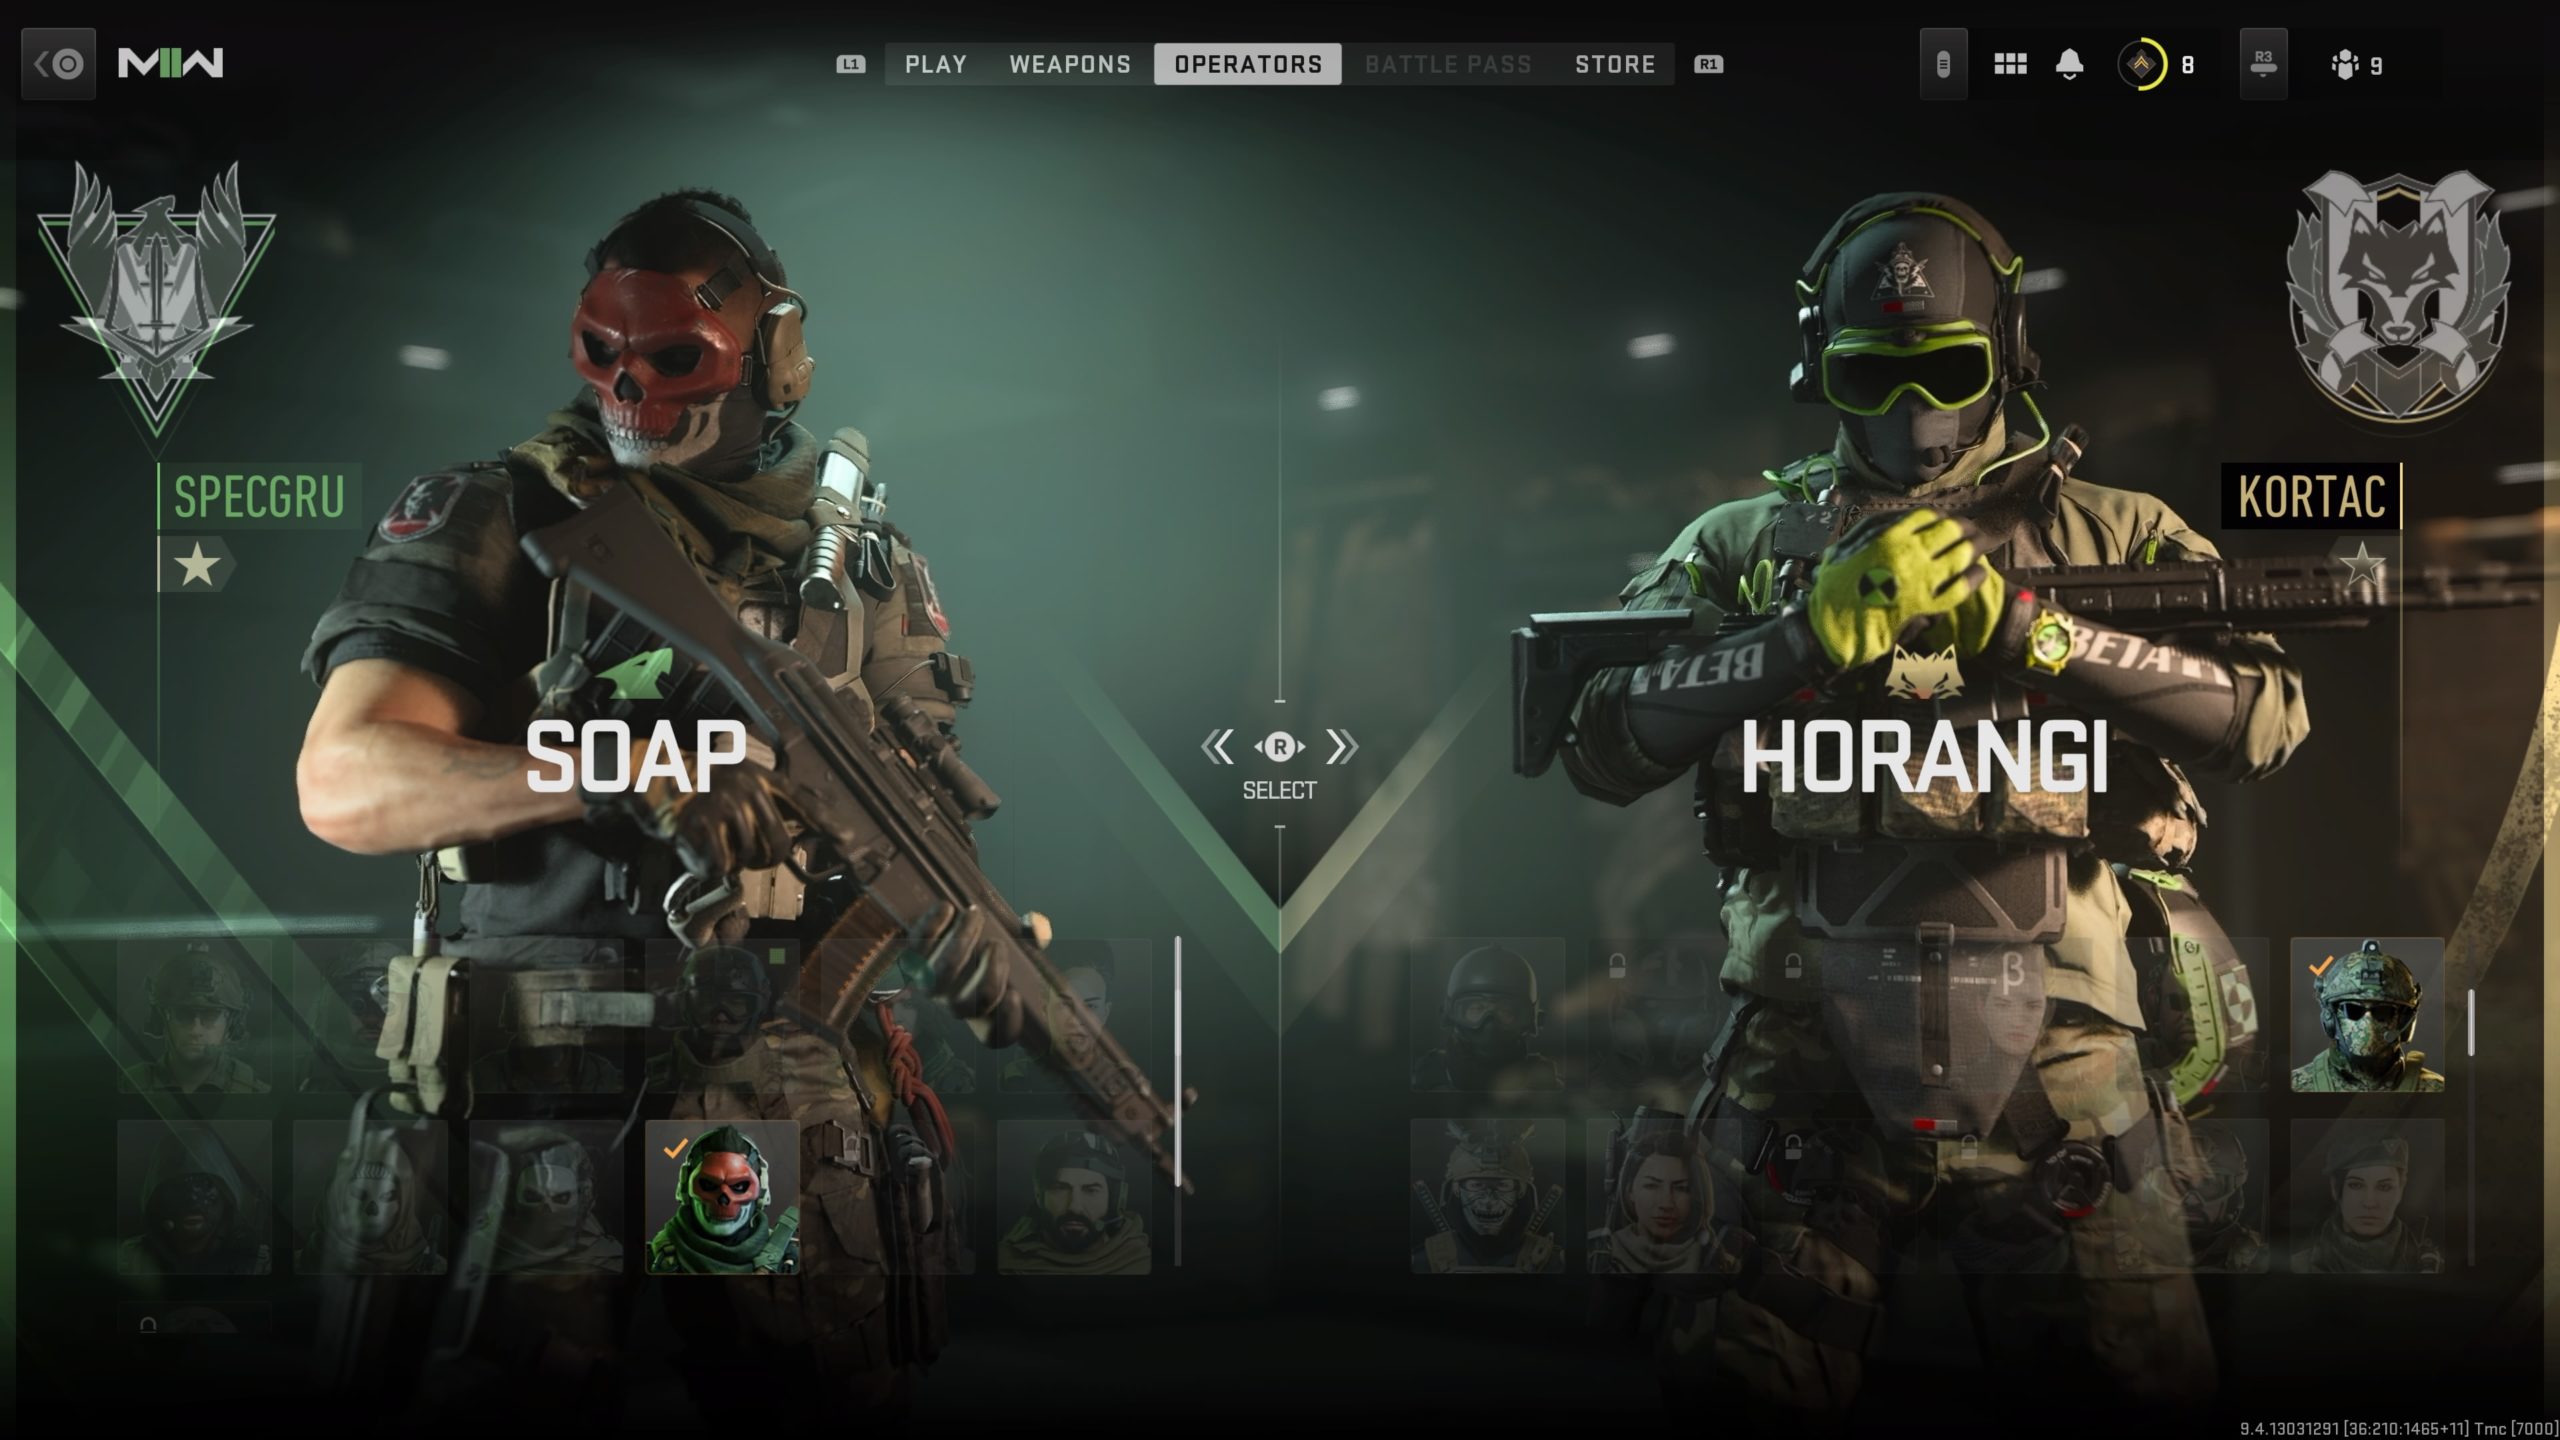 Introducing a New Battle Pass System in Call of Duty®: Modern